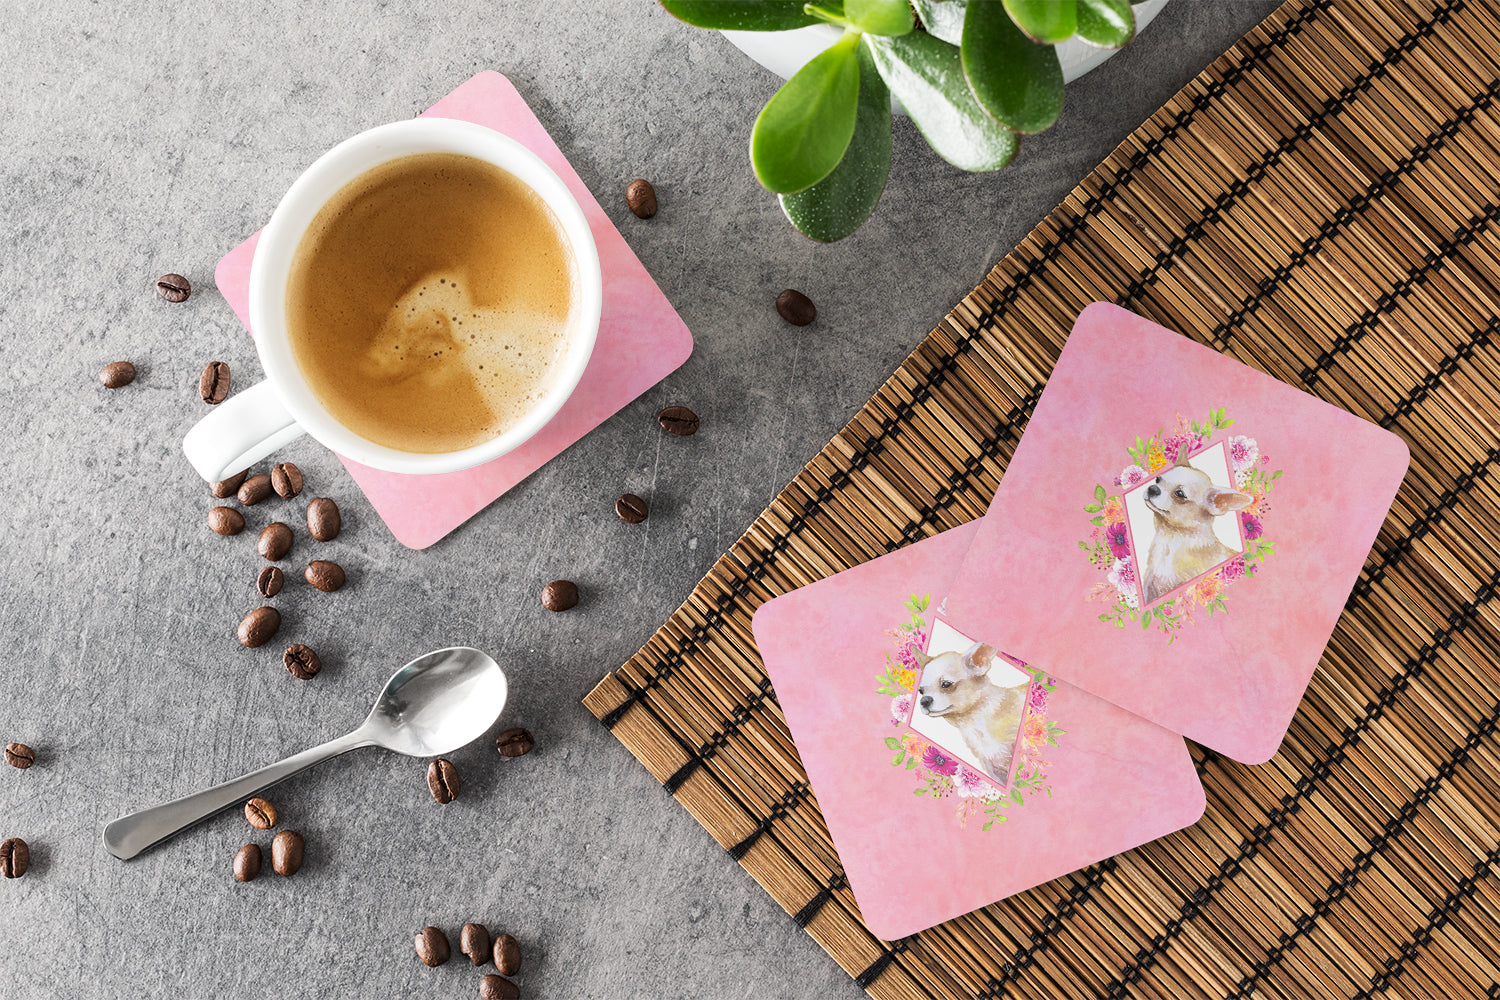 Set of 4 Chihuahua #2 Pink Flowers Foam Coasters Set of 4 CK4129FC - the-store.com